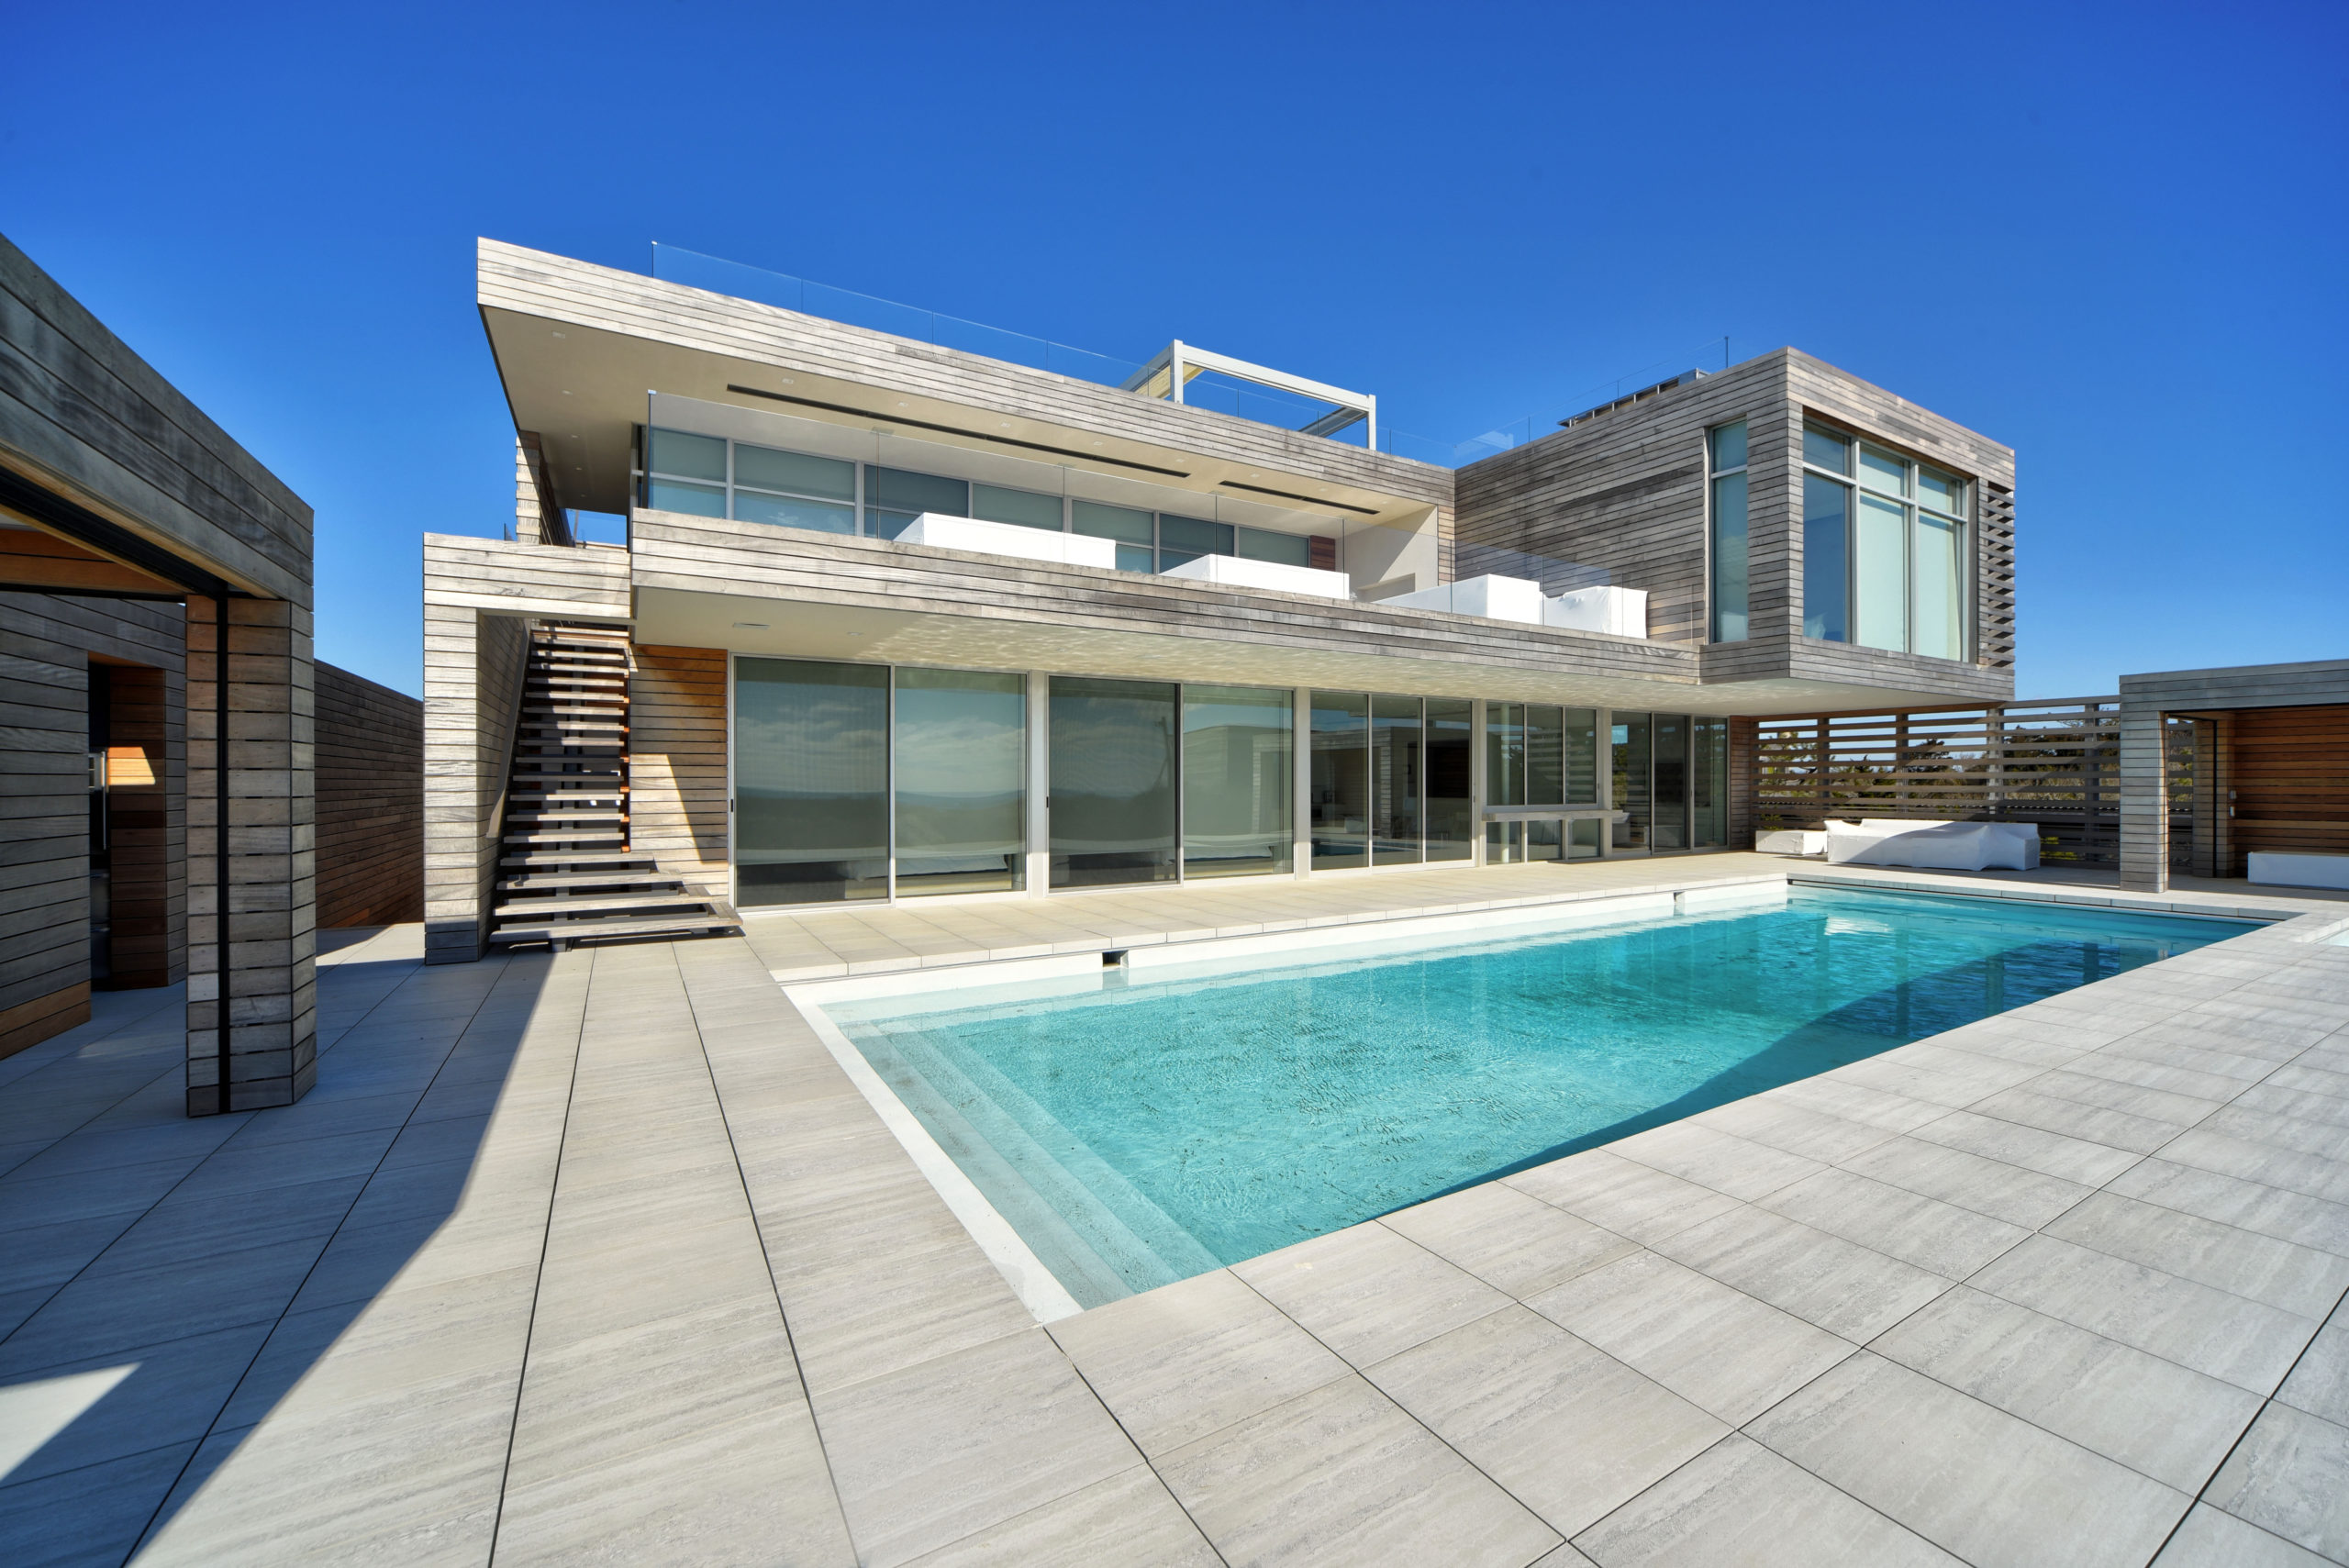 277 Surfside Drive in Bridgehampton is asking for $1 million for a one-month rental. 